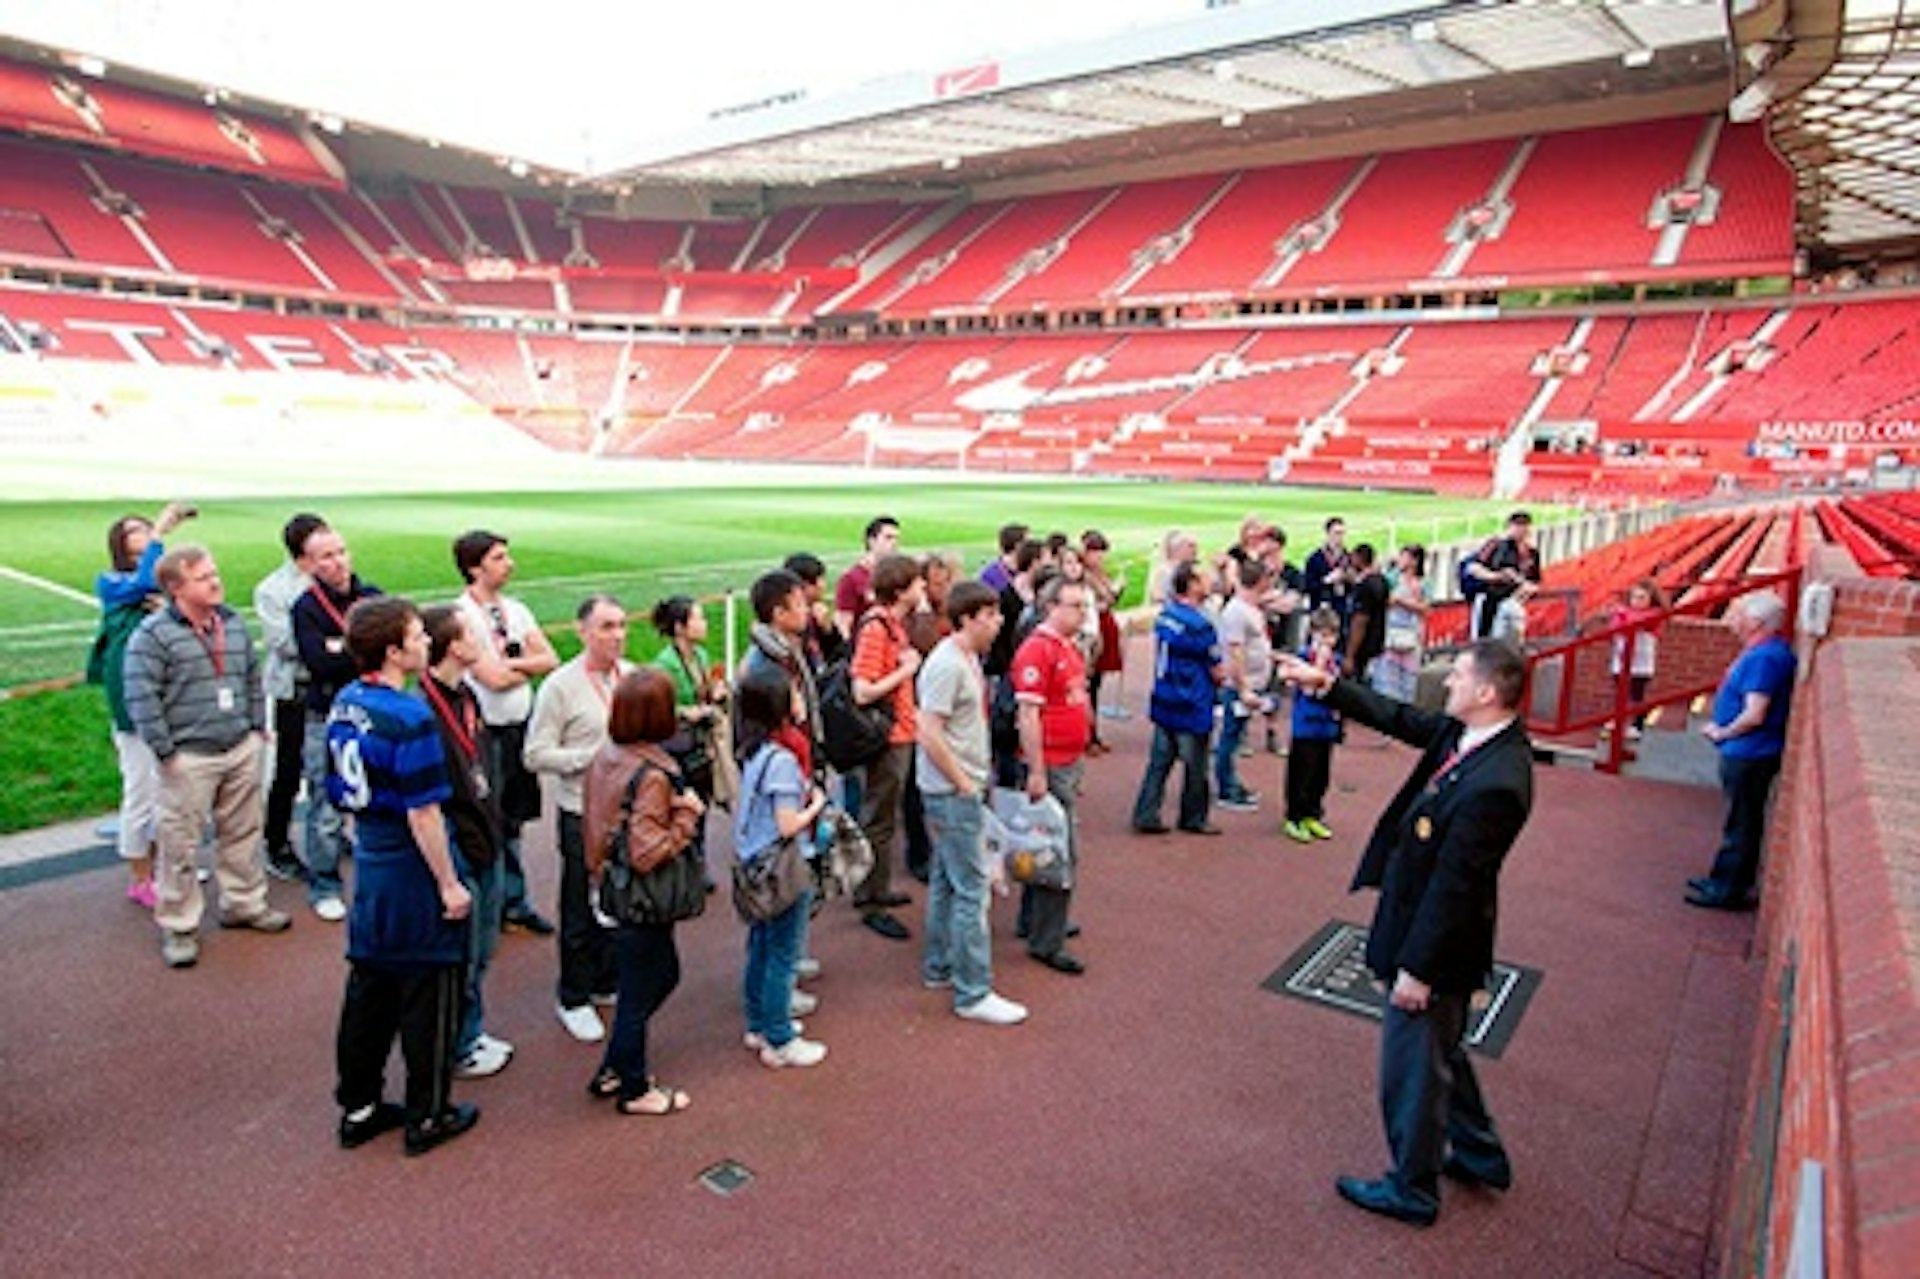 Manchester United Football Club Stadium Tour and Leisure Cruise for One Adult and One Child 3